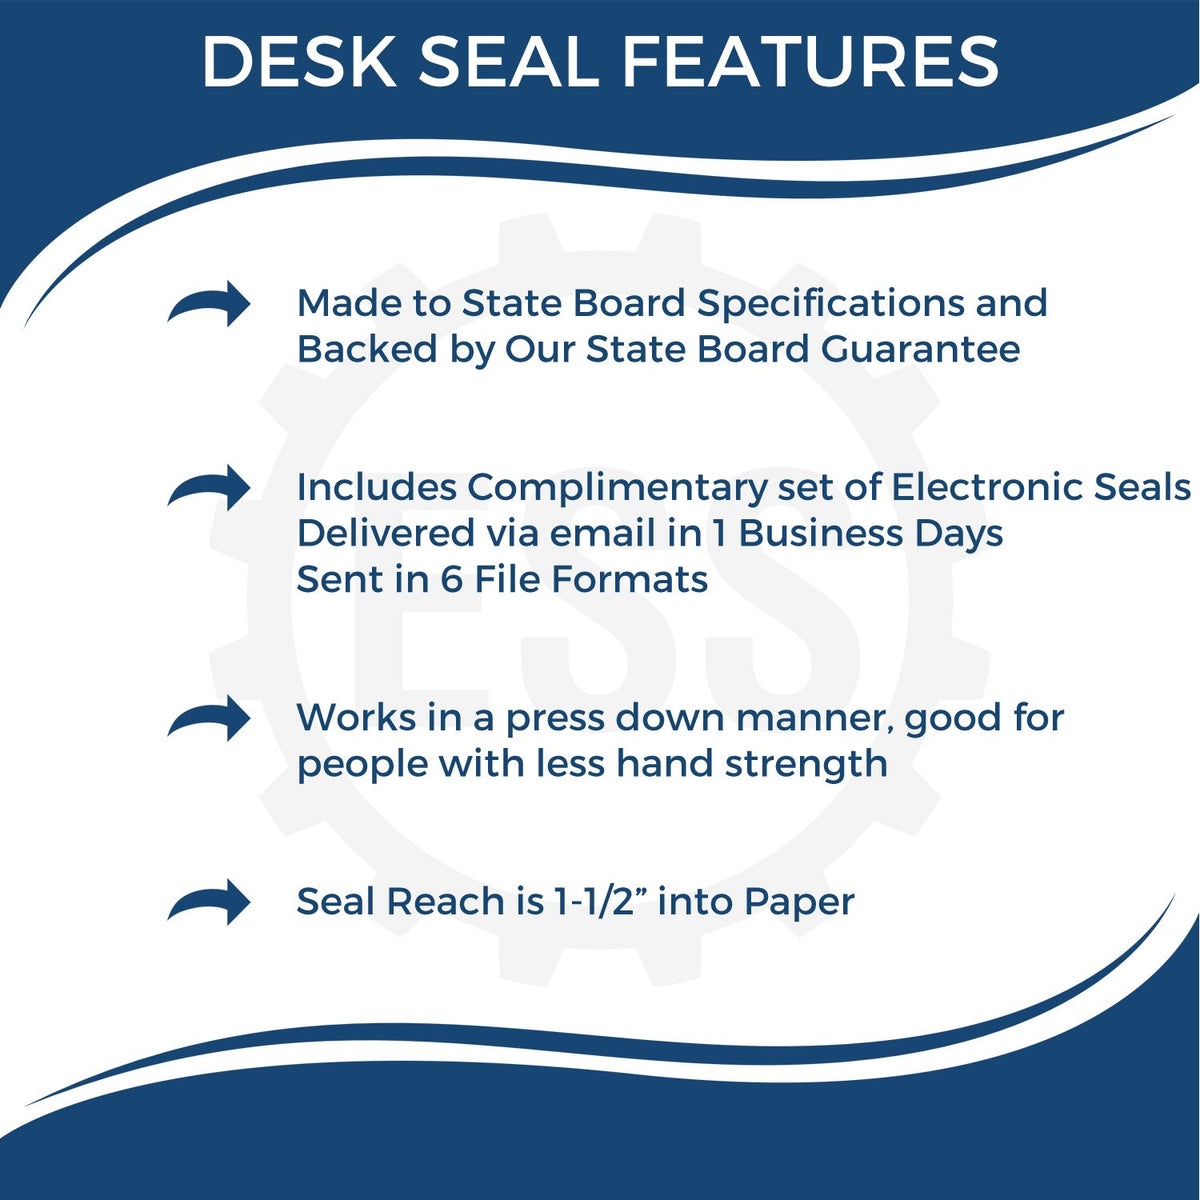 A picture of an infographic highlighting the selling points for the West Virginia Desk Architect Embossing Seal